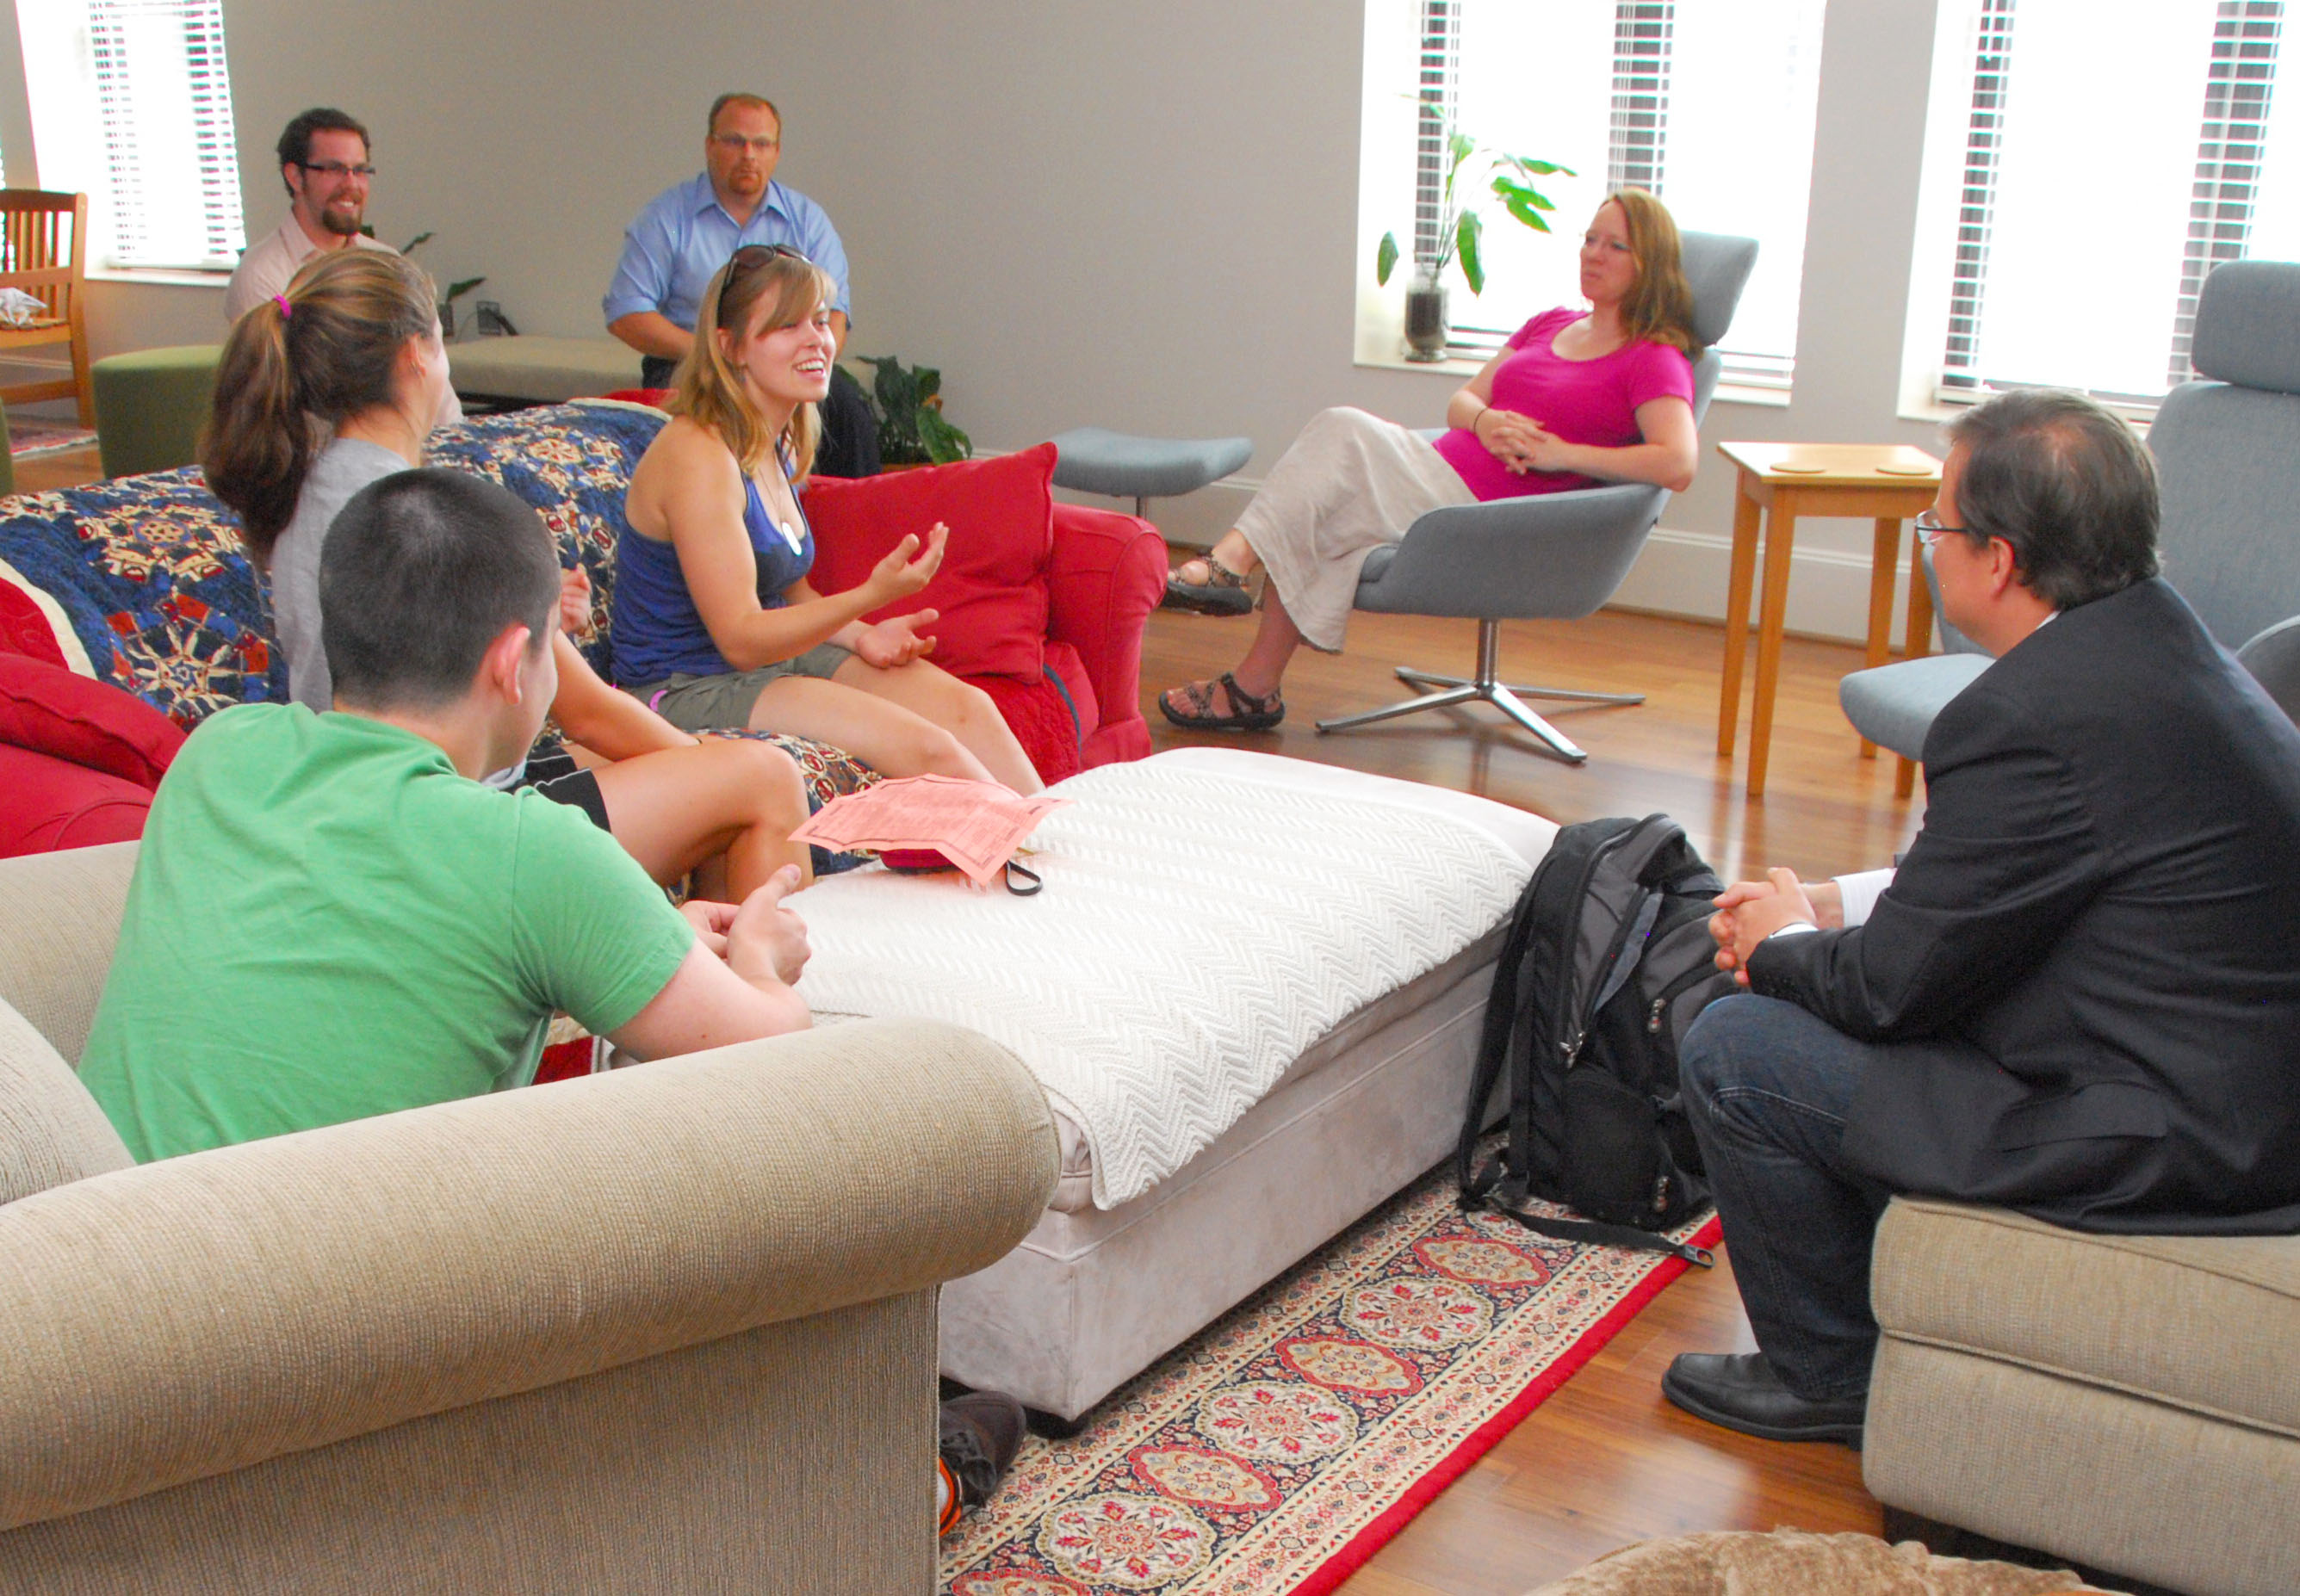 Students, faculty, and faculty principals talk in the sitting room at the Honors Residential College.